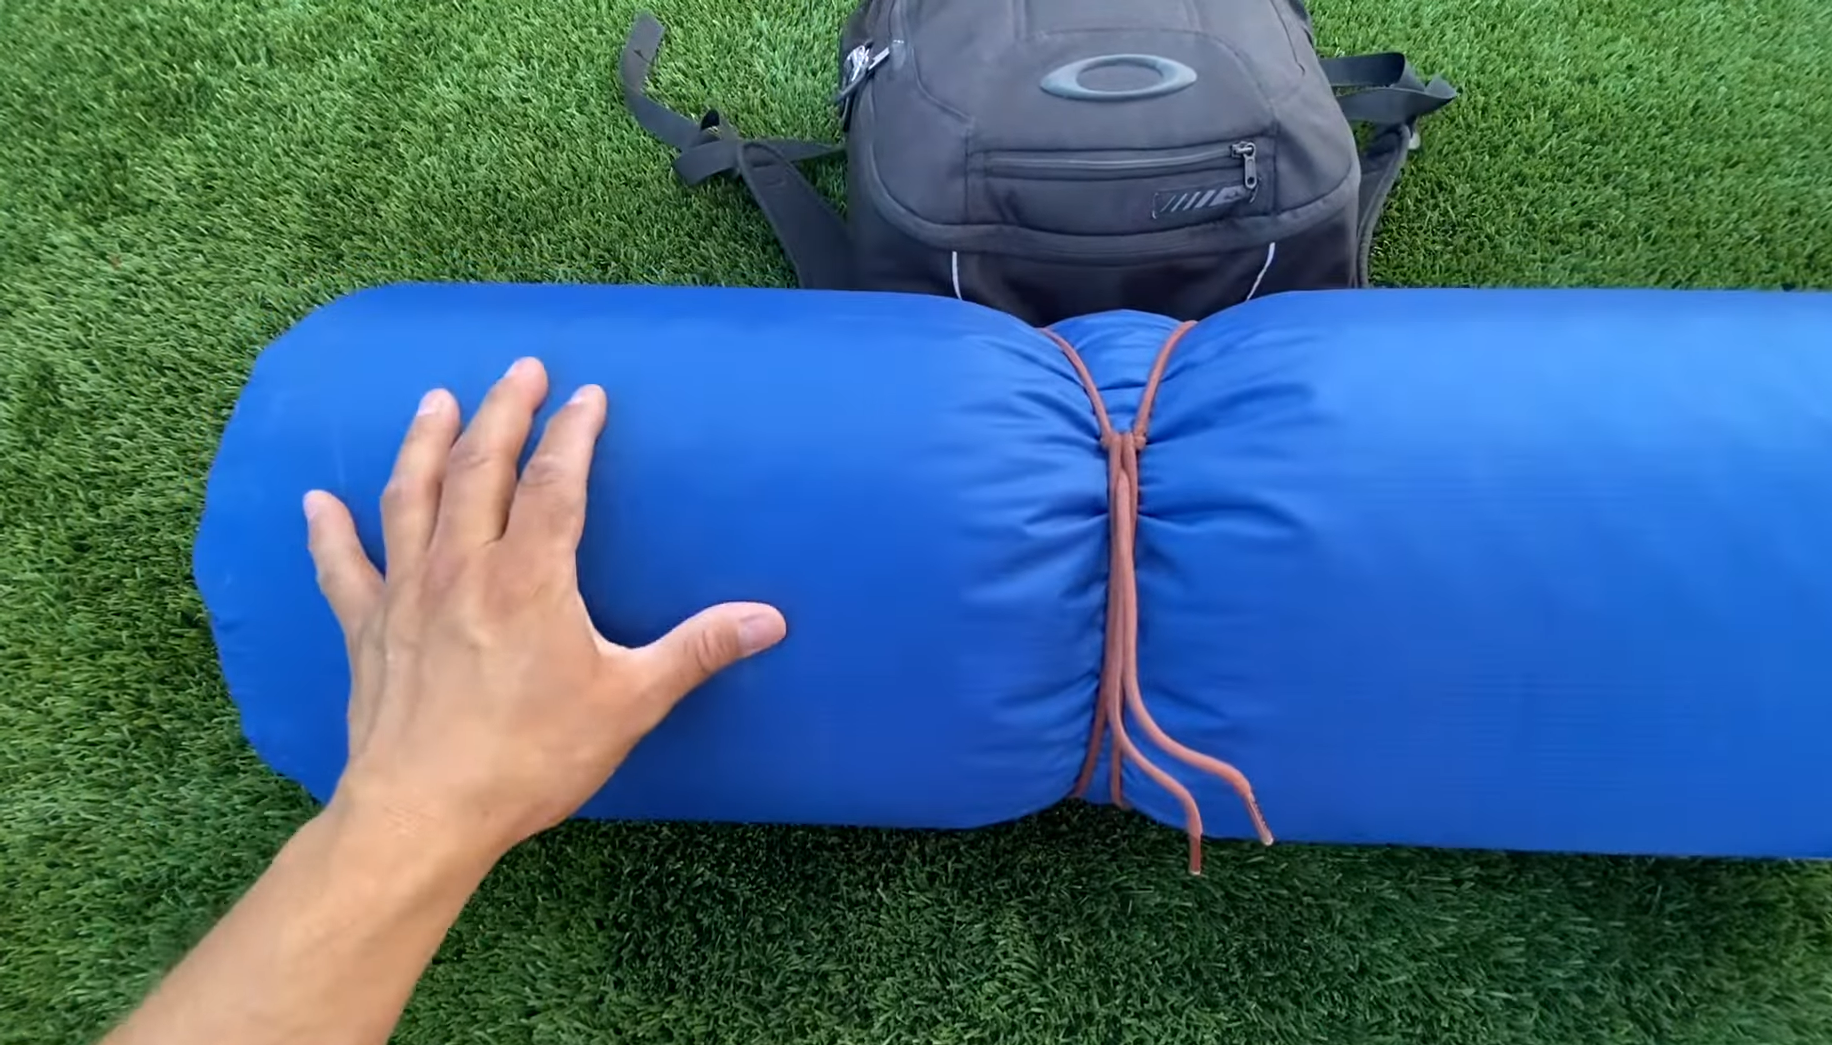 Attach the sleeping bag at the top of the backpack